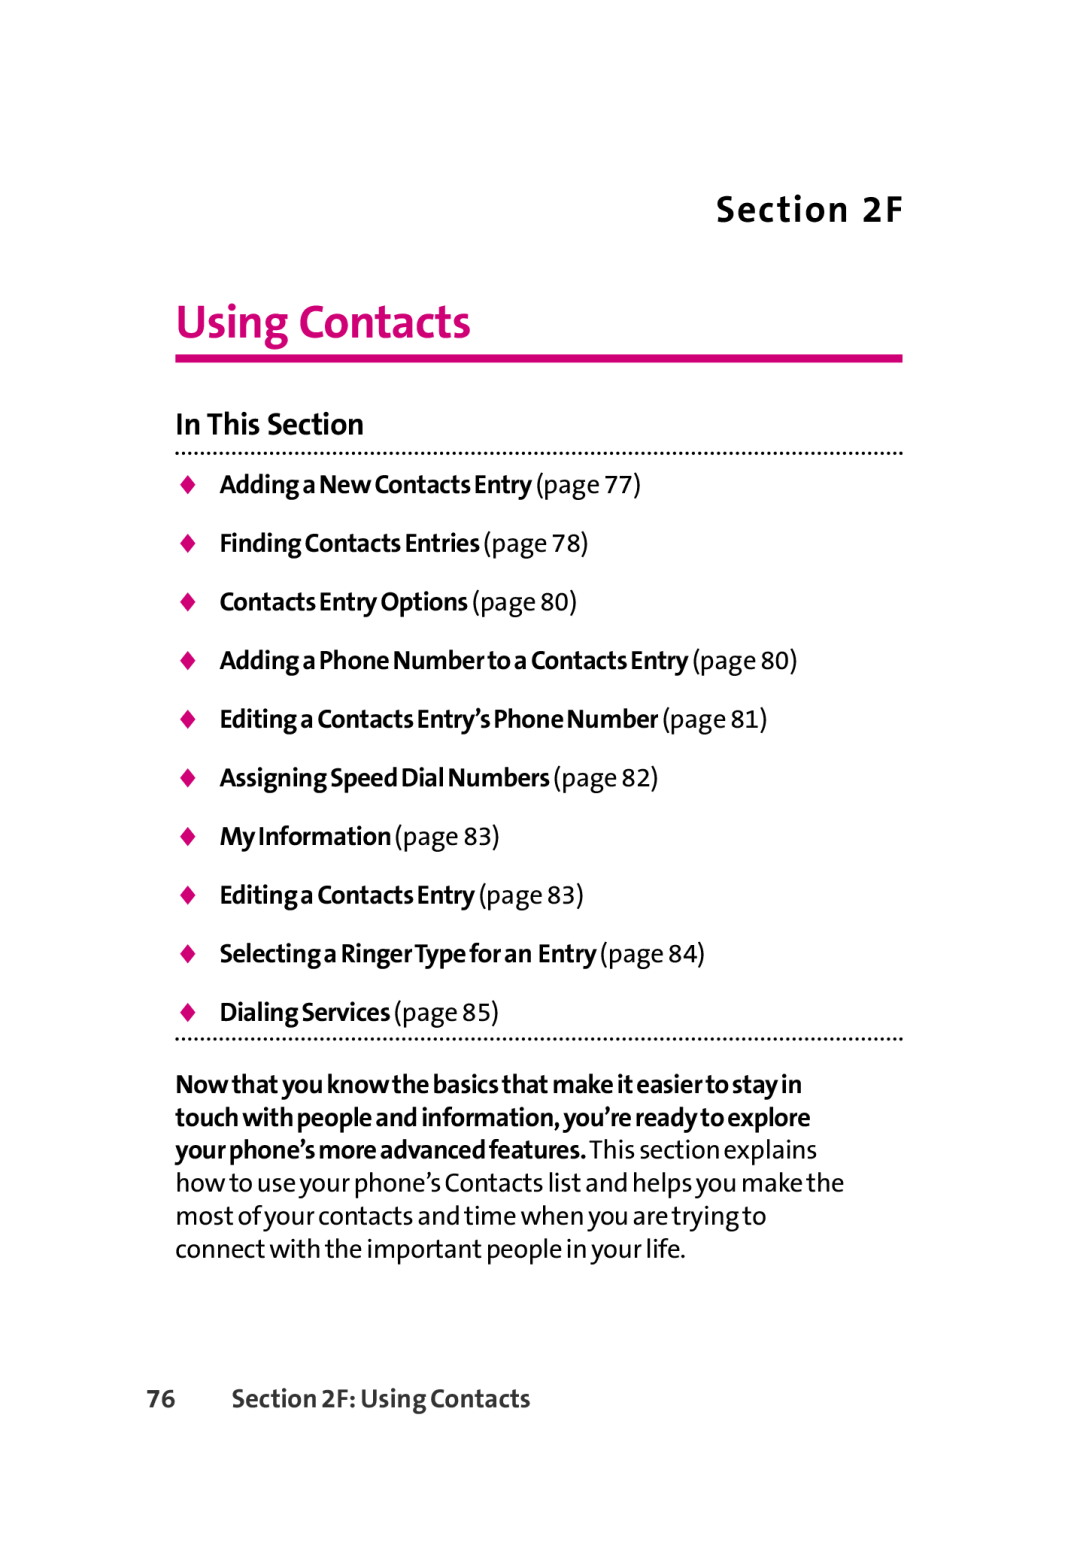 LG Electronics 350 manual AddingaNewContactsEntrypage FindingContactsEntriespage, F Using Contacts, In This Section 